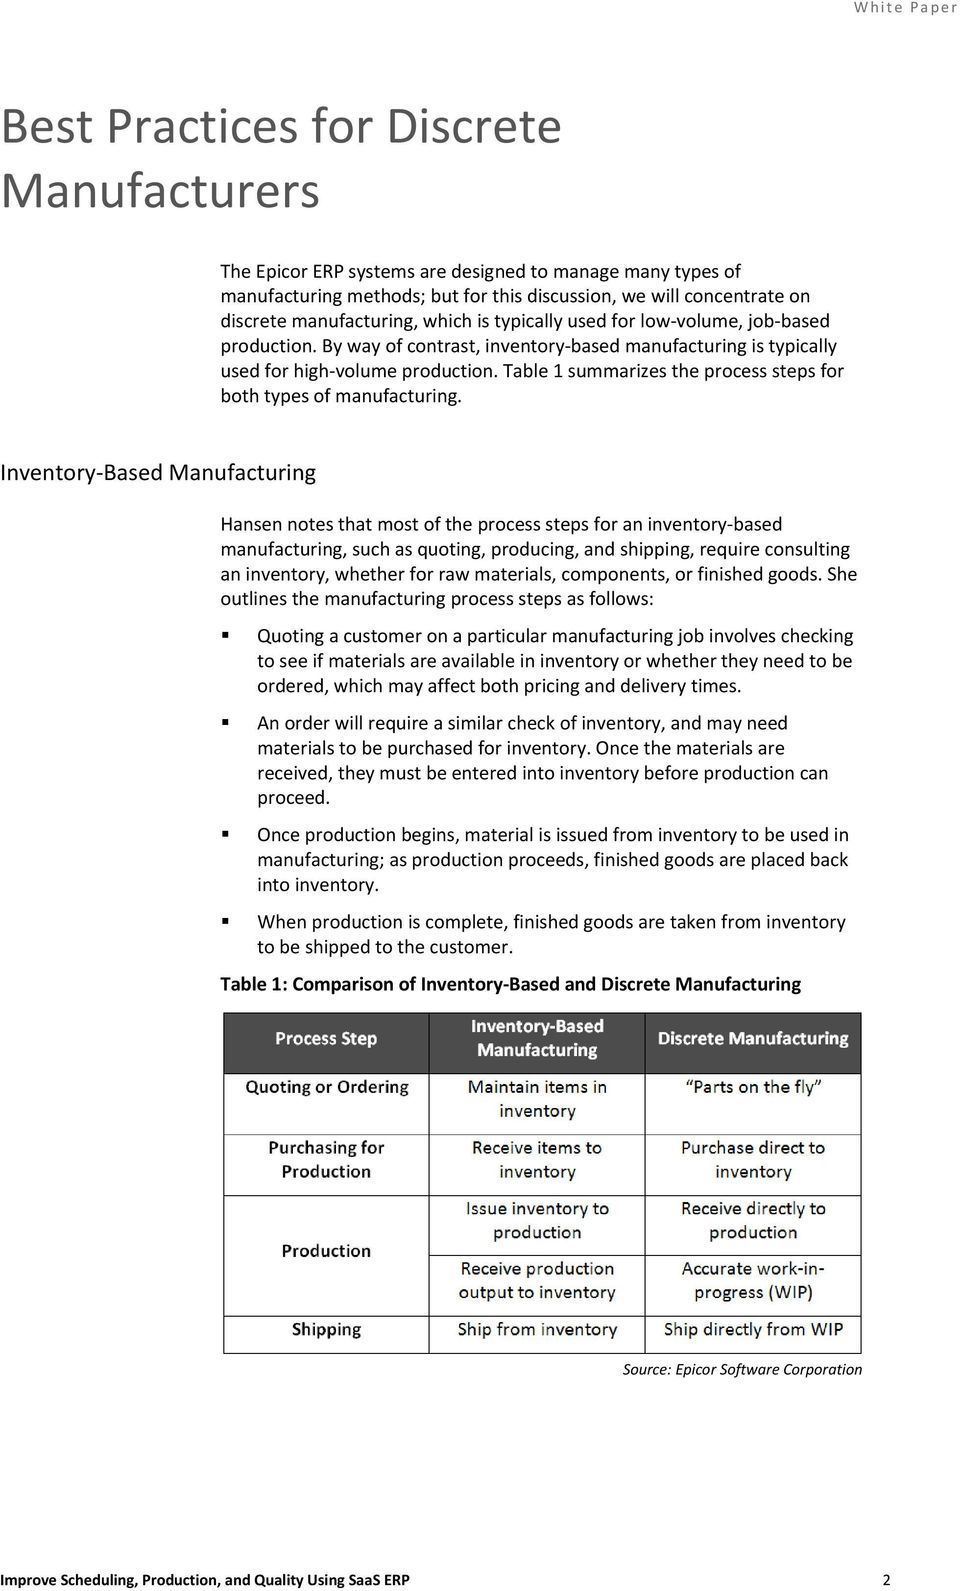 Table 1 summarizes the process steps for both types of manufacturing.